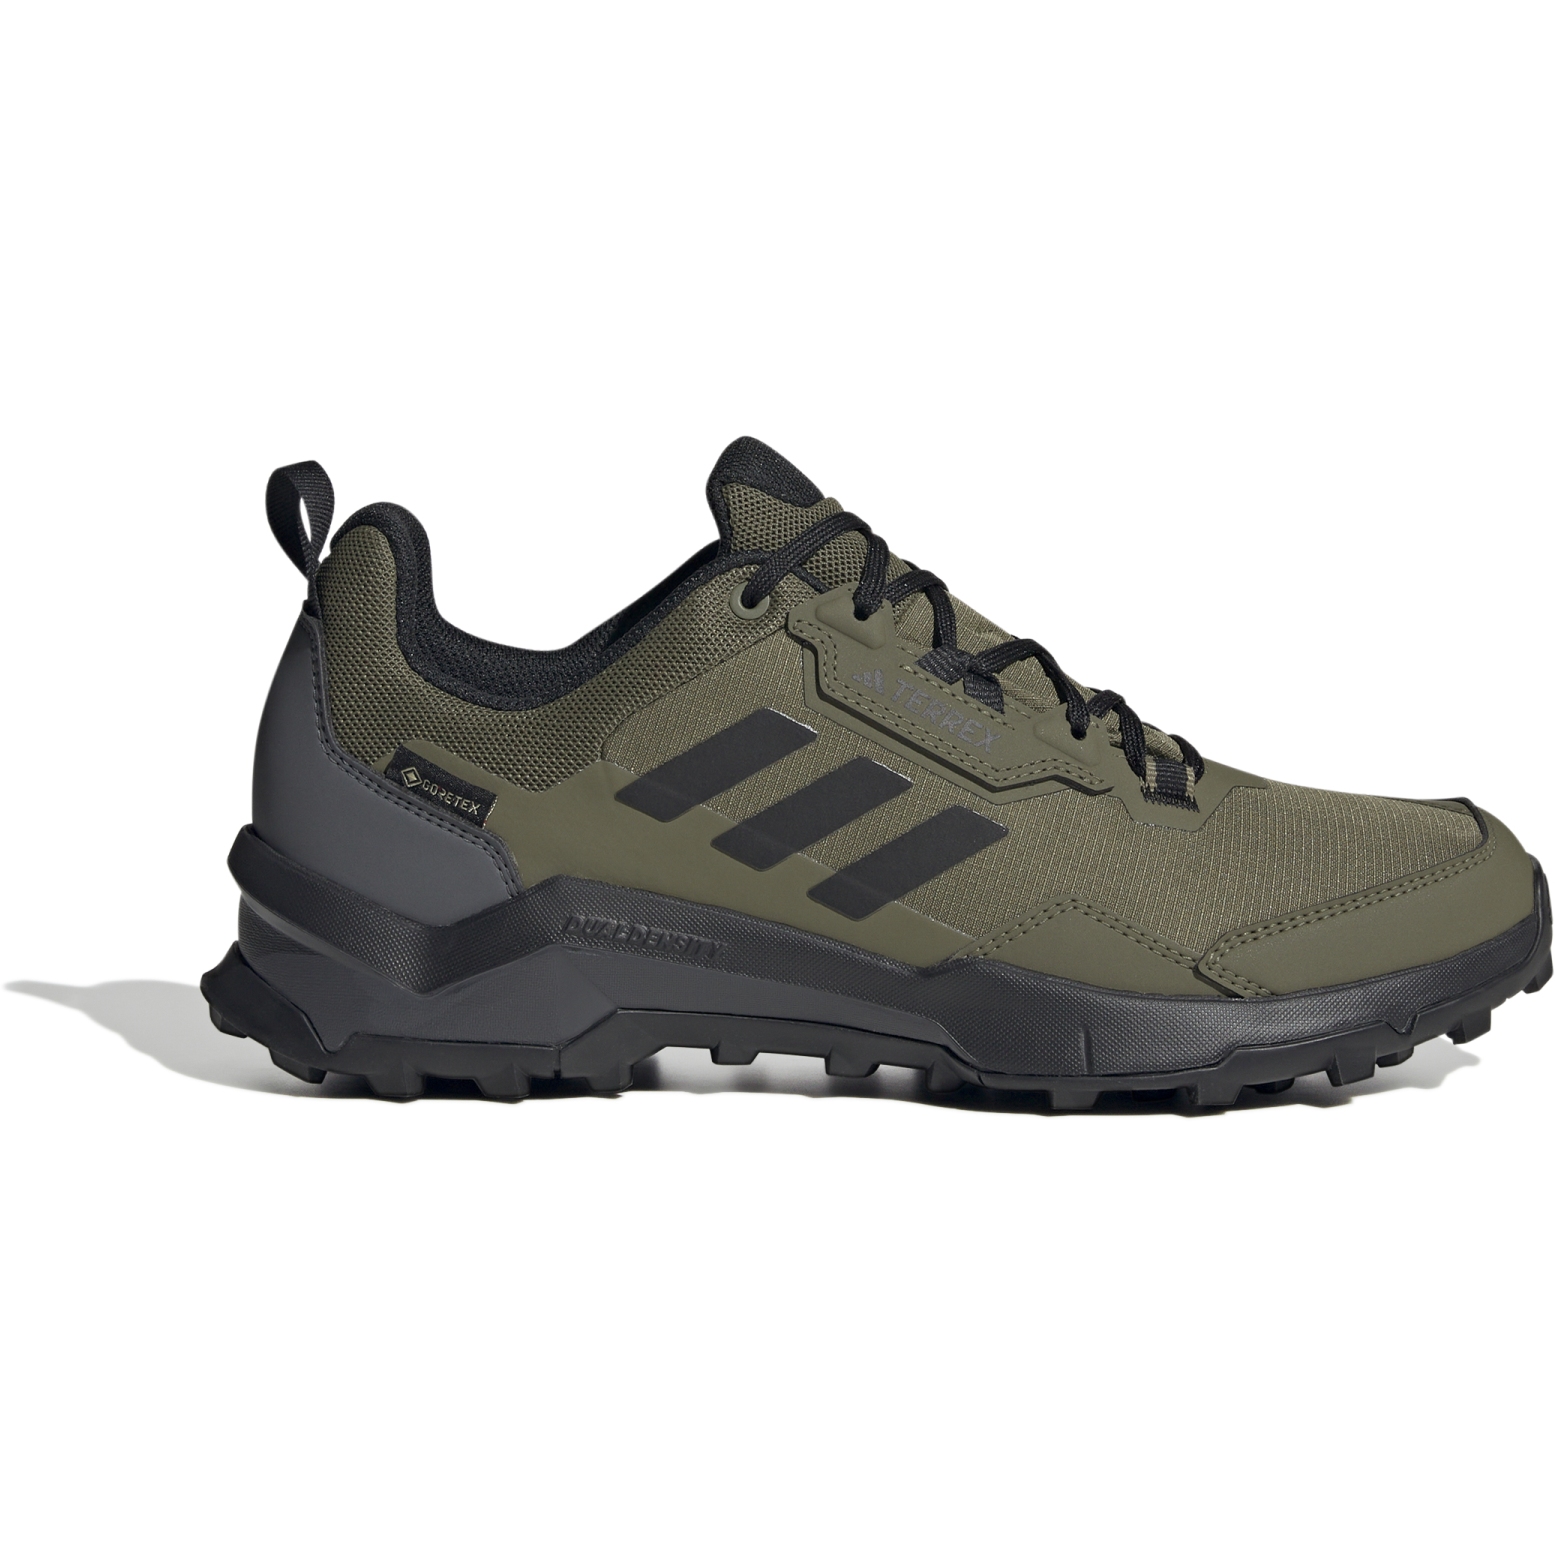 Picture of adidas TERREX AX4 GORE-TEX Hiking Shoes Men - focus olive/core black/grey five HP7400